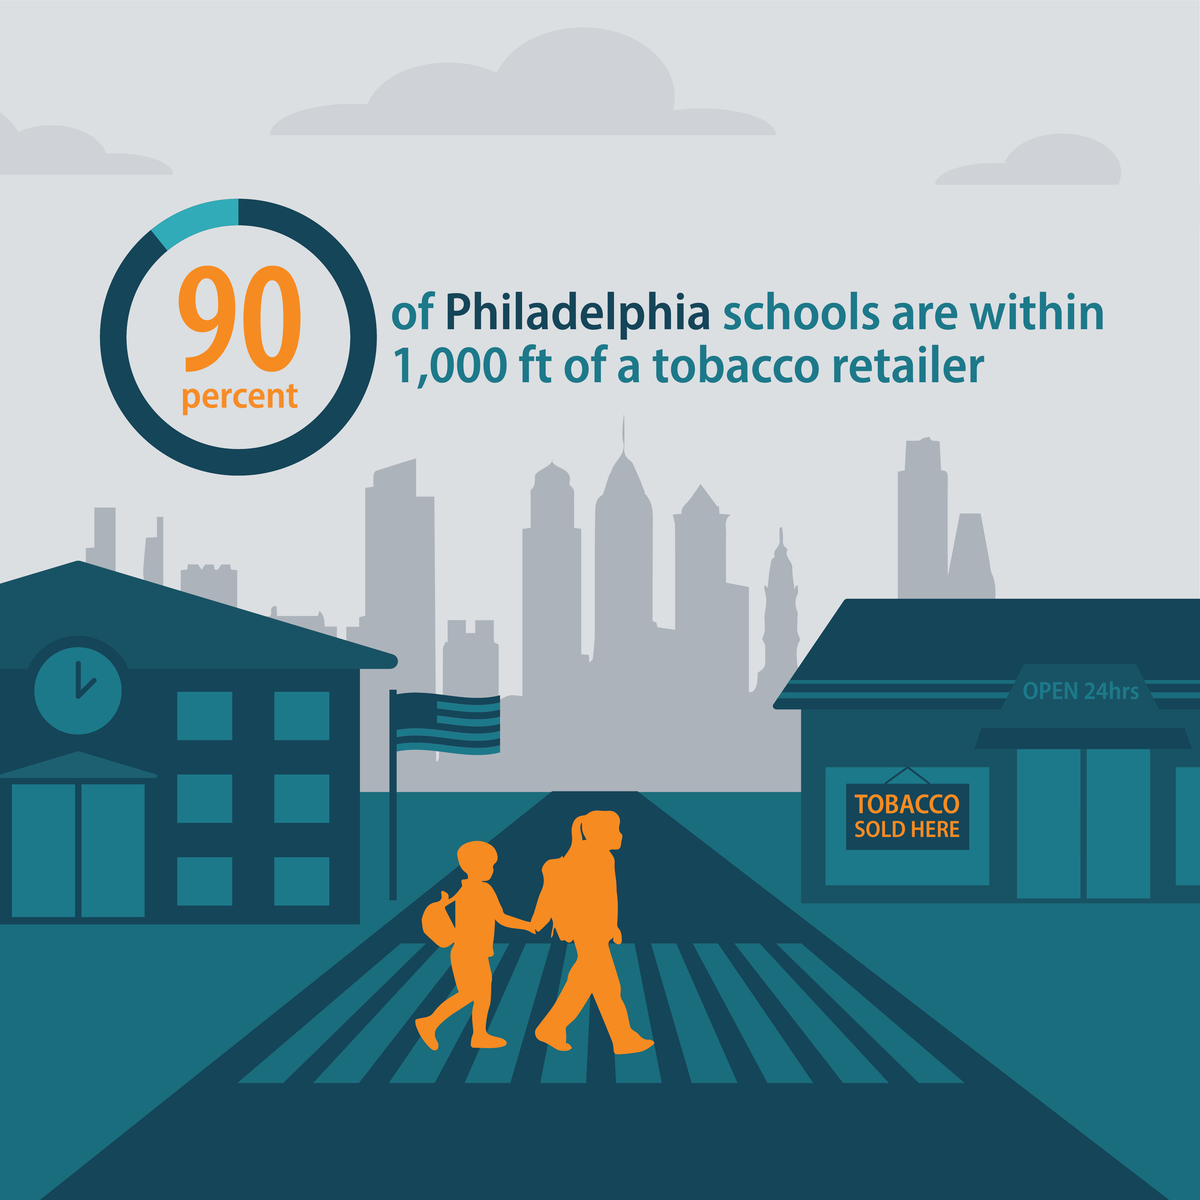 90 percent of Philadelphia schools are within 1,000 feet of a tobacco retailer